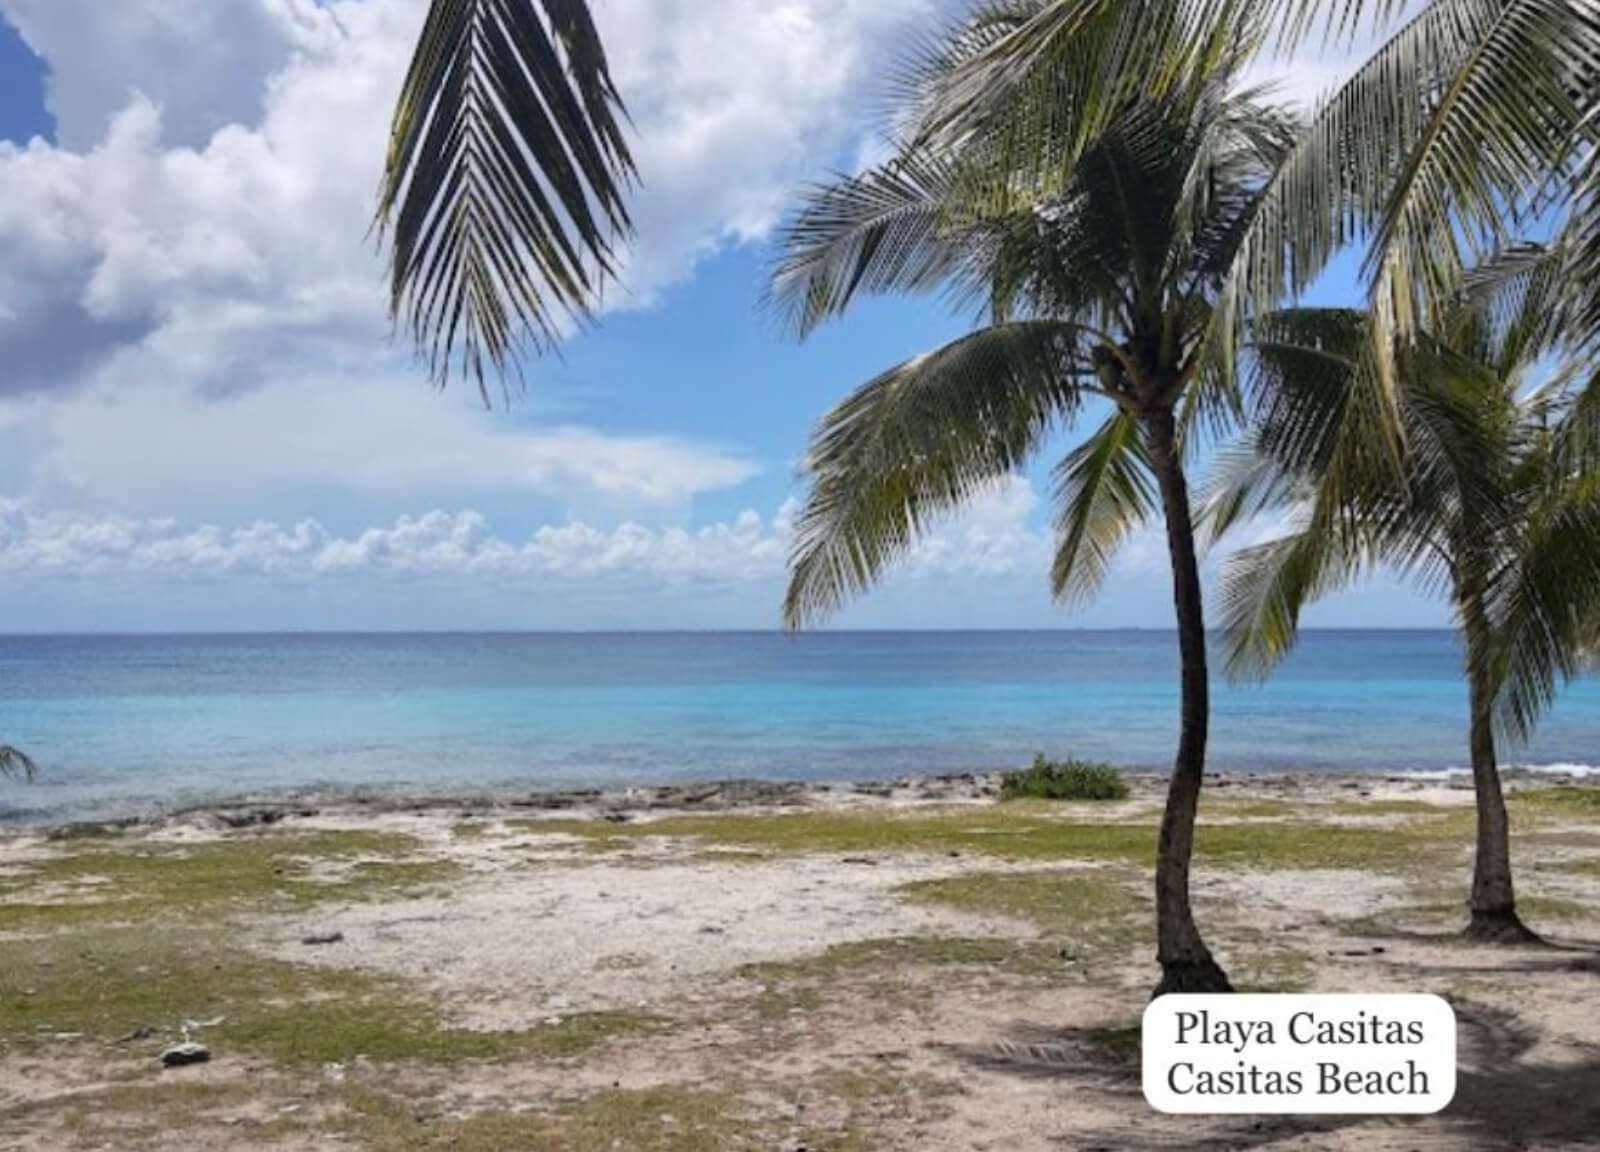 Condo 50 meters from the ocean, pool, gym, barbecue area, business center, pre-construction, on Cozumel Sea Boardwalk, for sale.